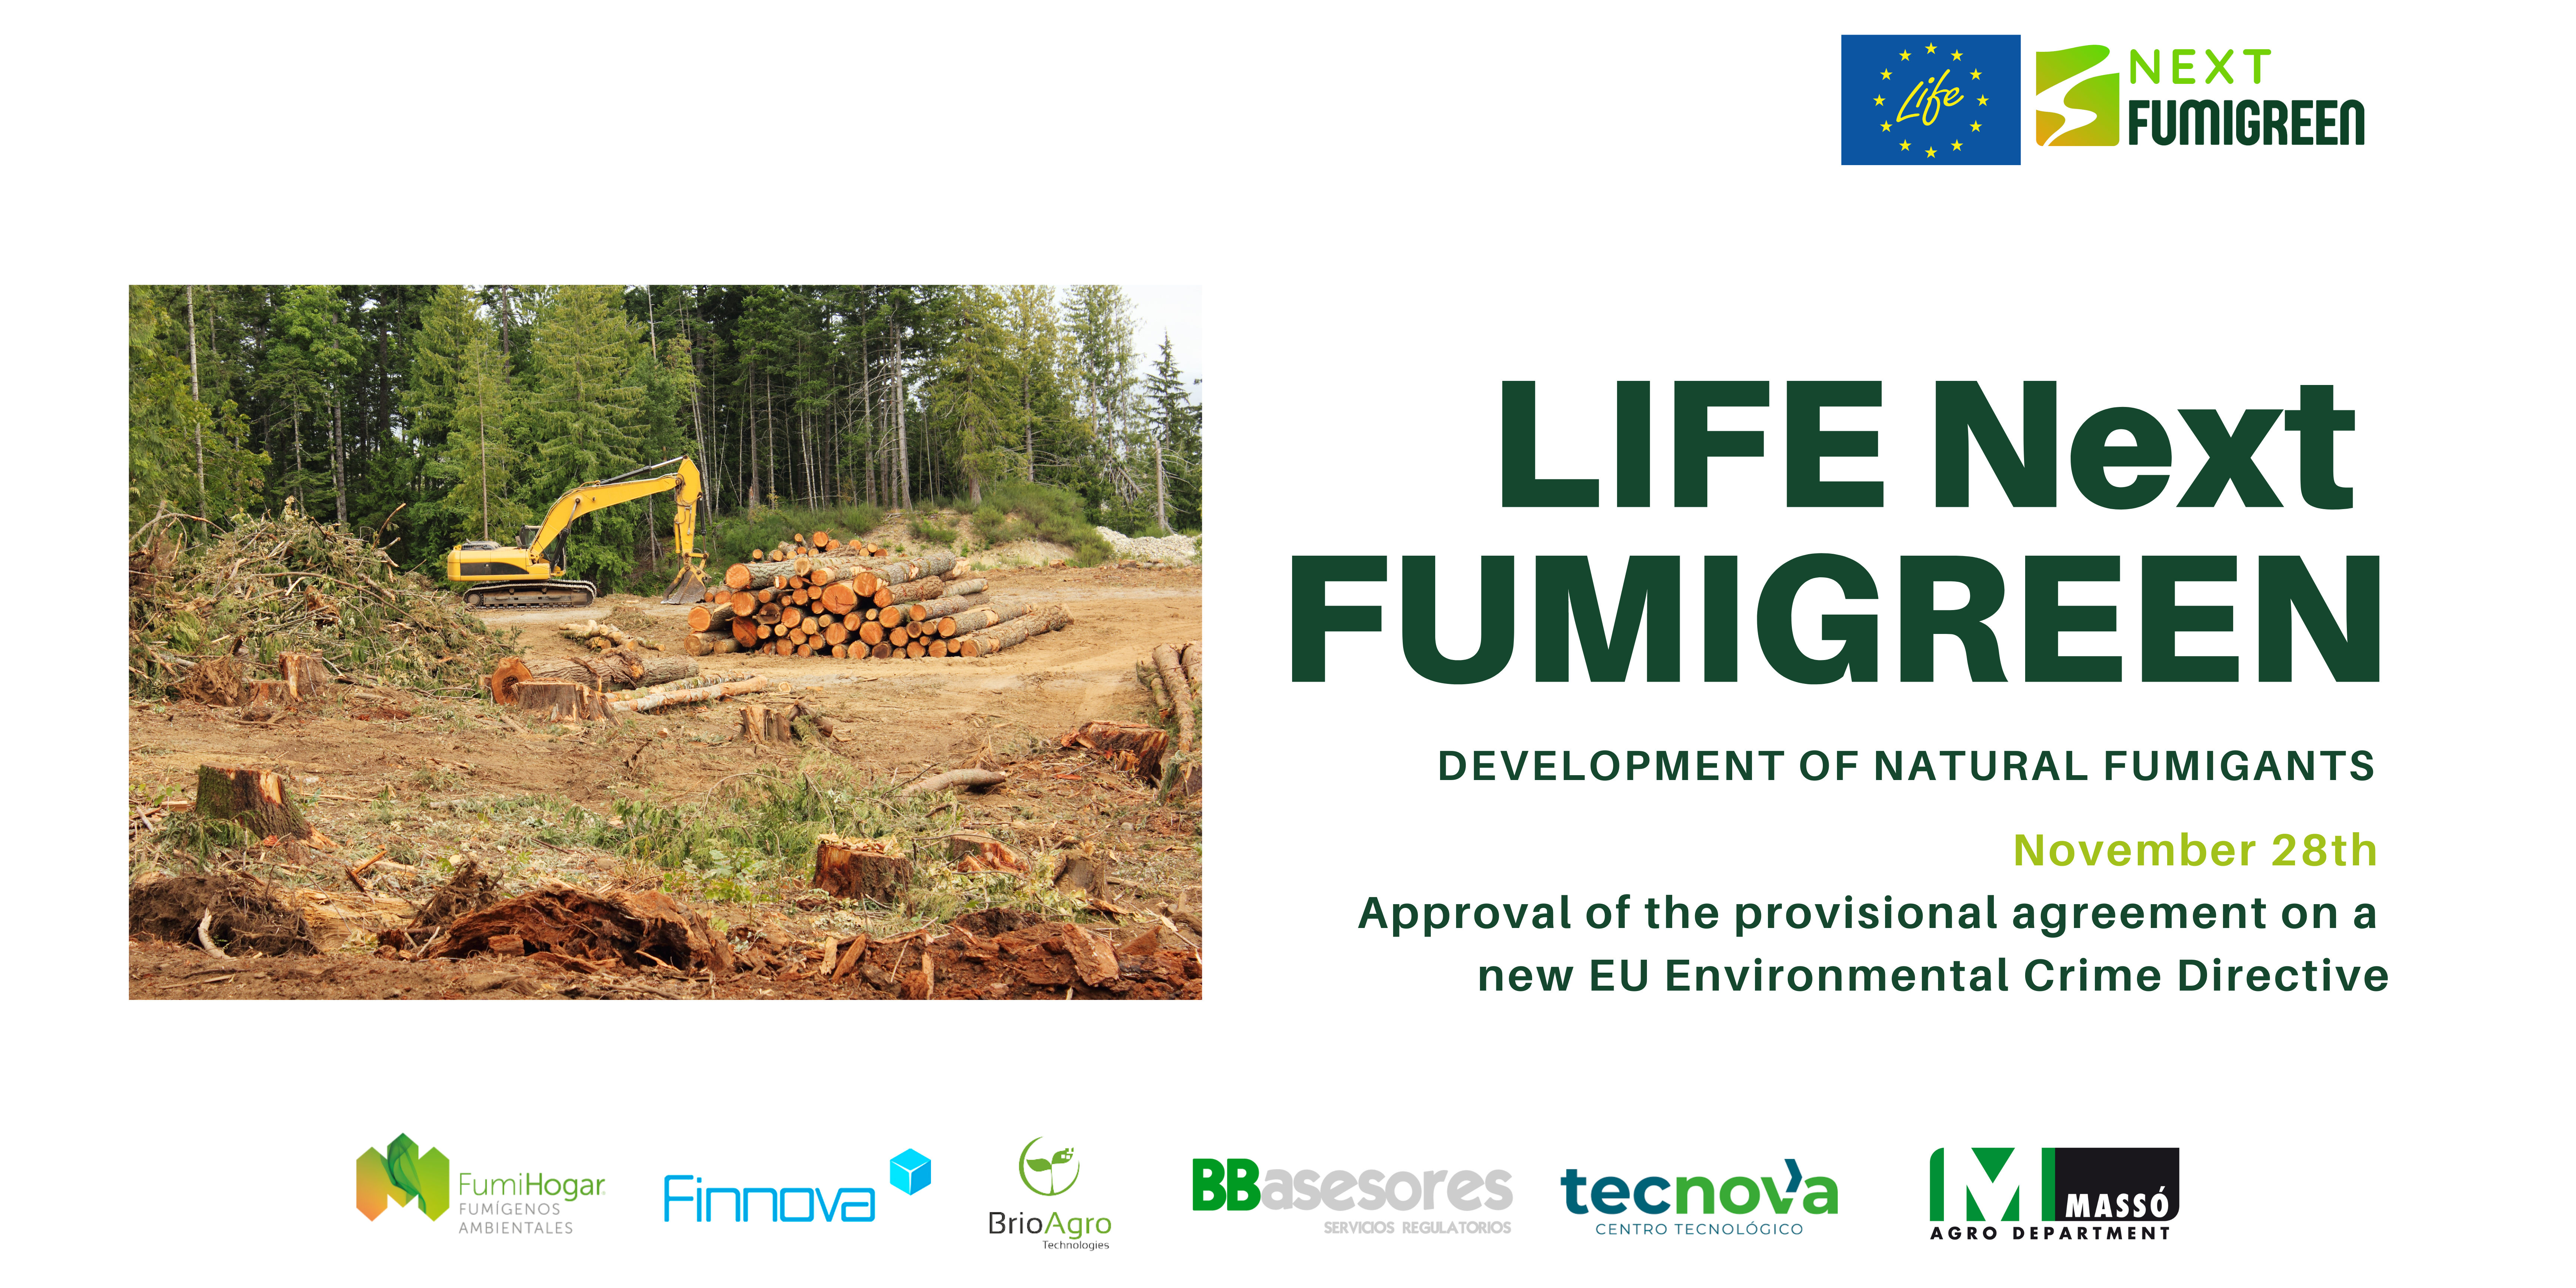 LIFE NextFUMIGREEN welcomes the approval of the provisional agreement on a new EU Environmental Crime Directive